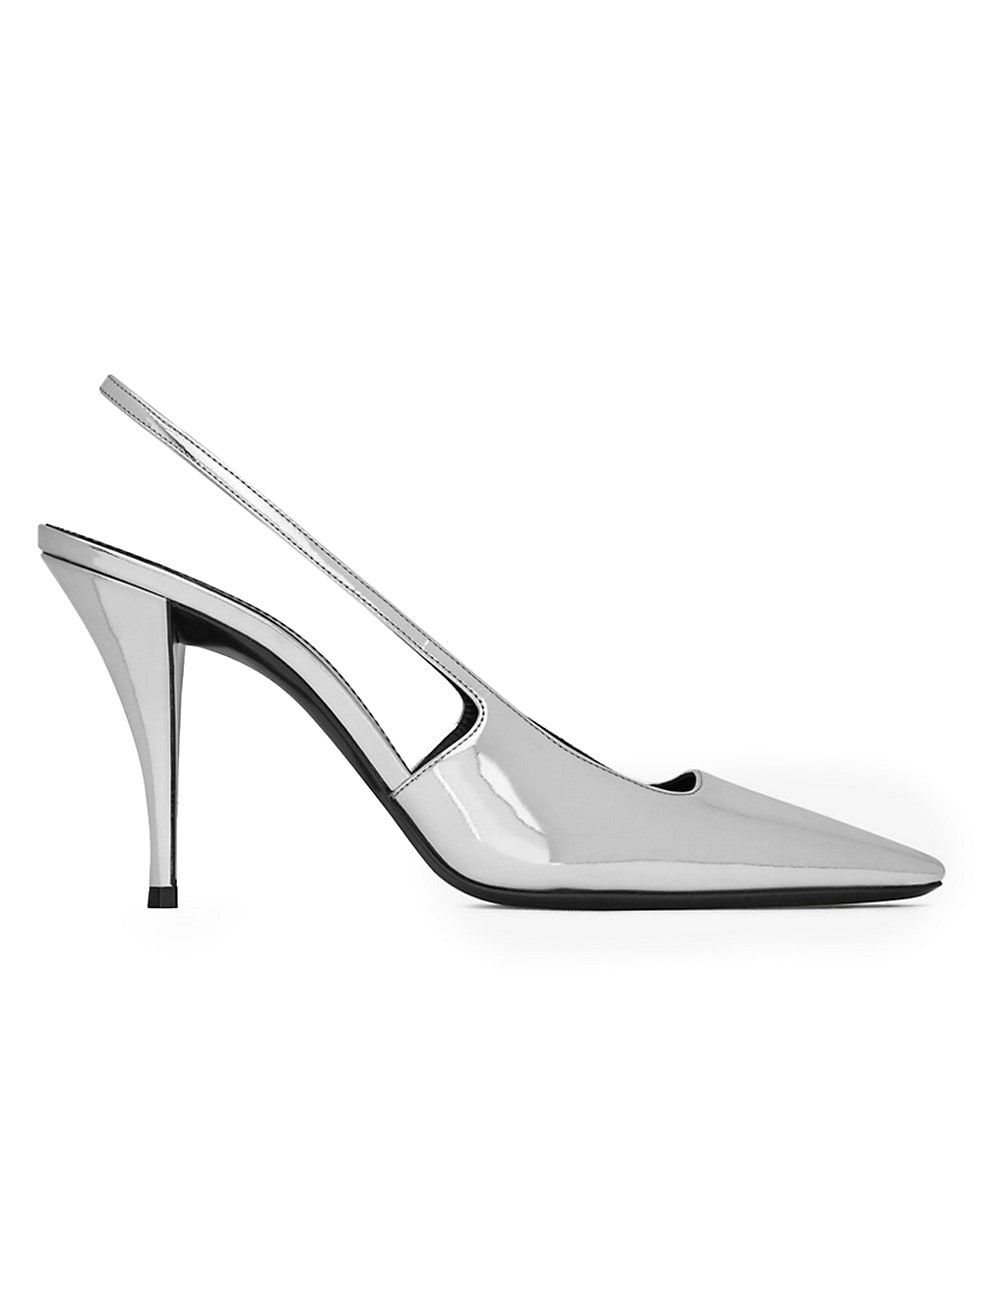 Saint Laurent Blade Slingback Pumps In Mirrored Leather | Saks Fifth Avenue